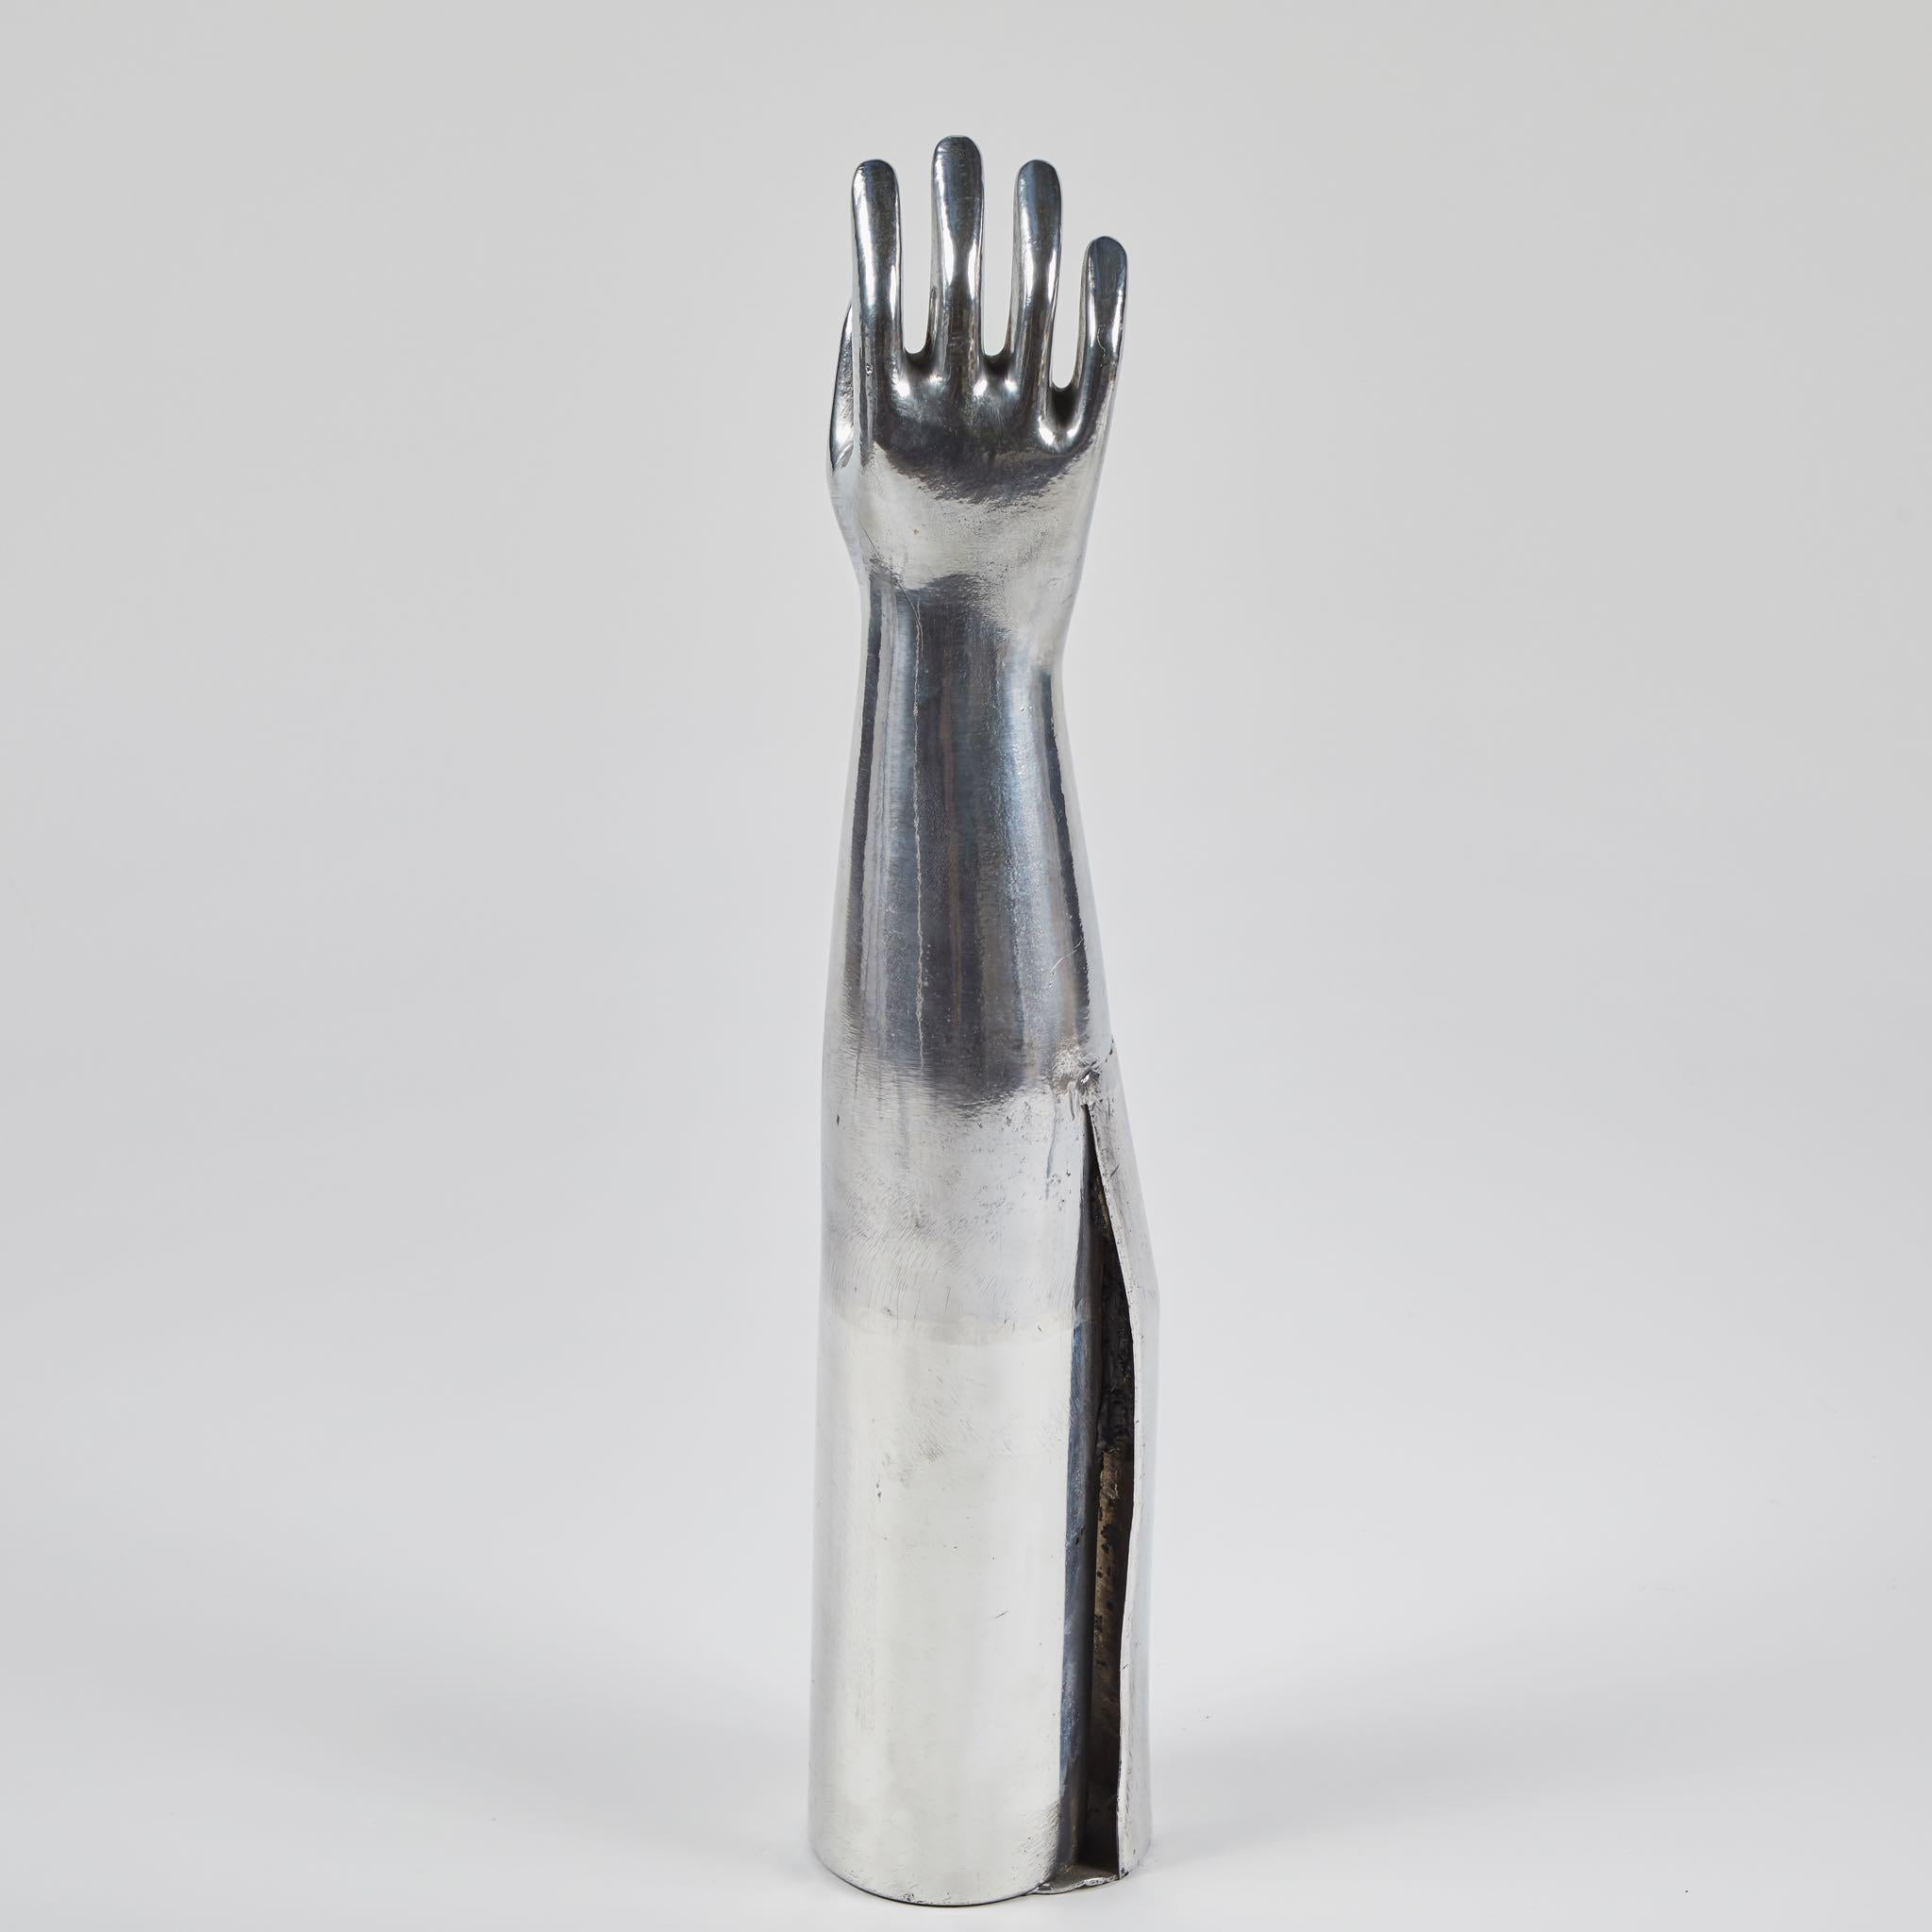 A sculptural mold of a human hand, made from aluminum. Originating in England, circa 1940. (Two available).